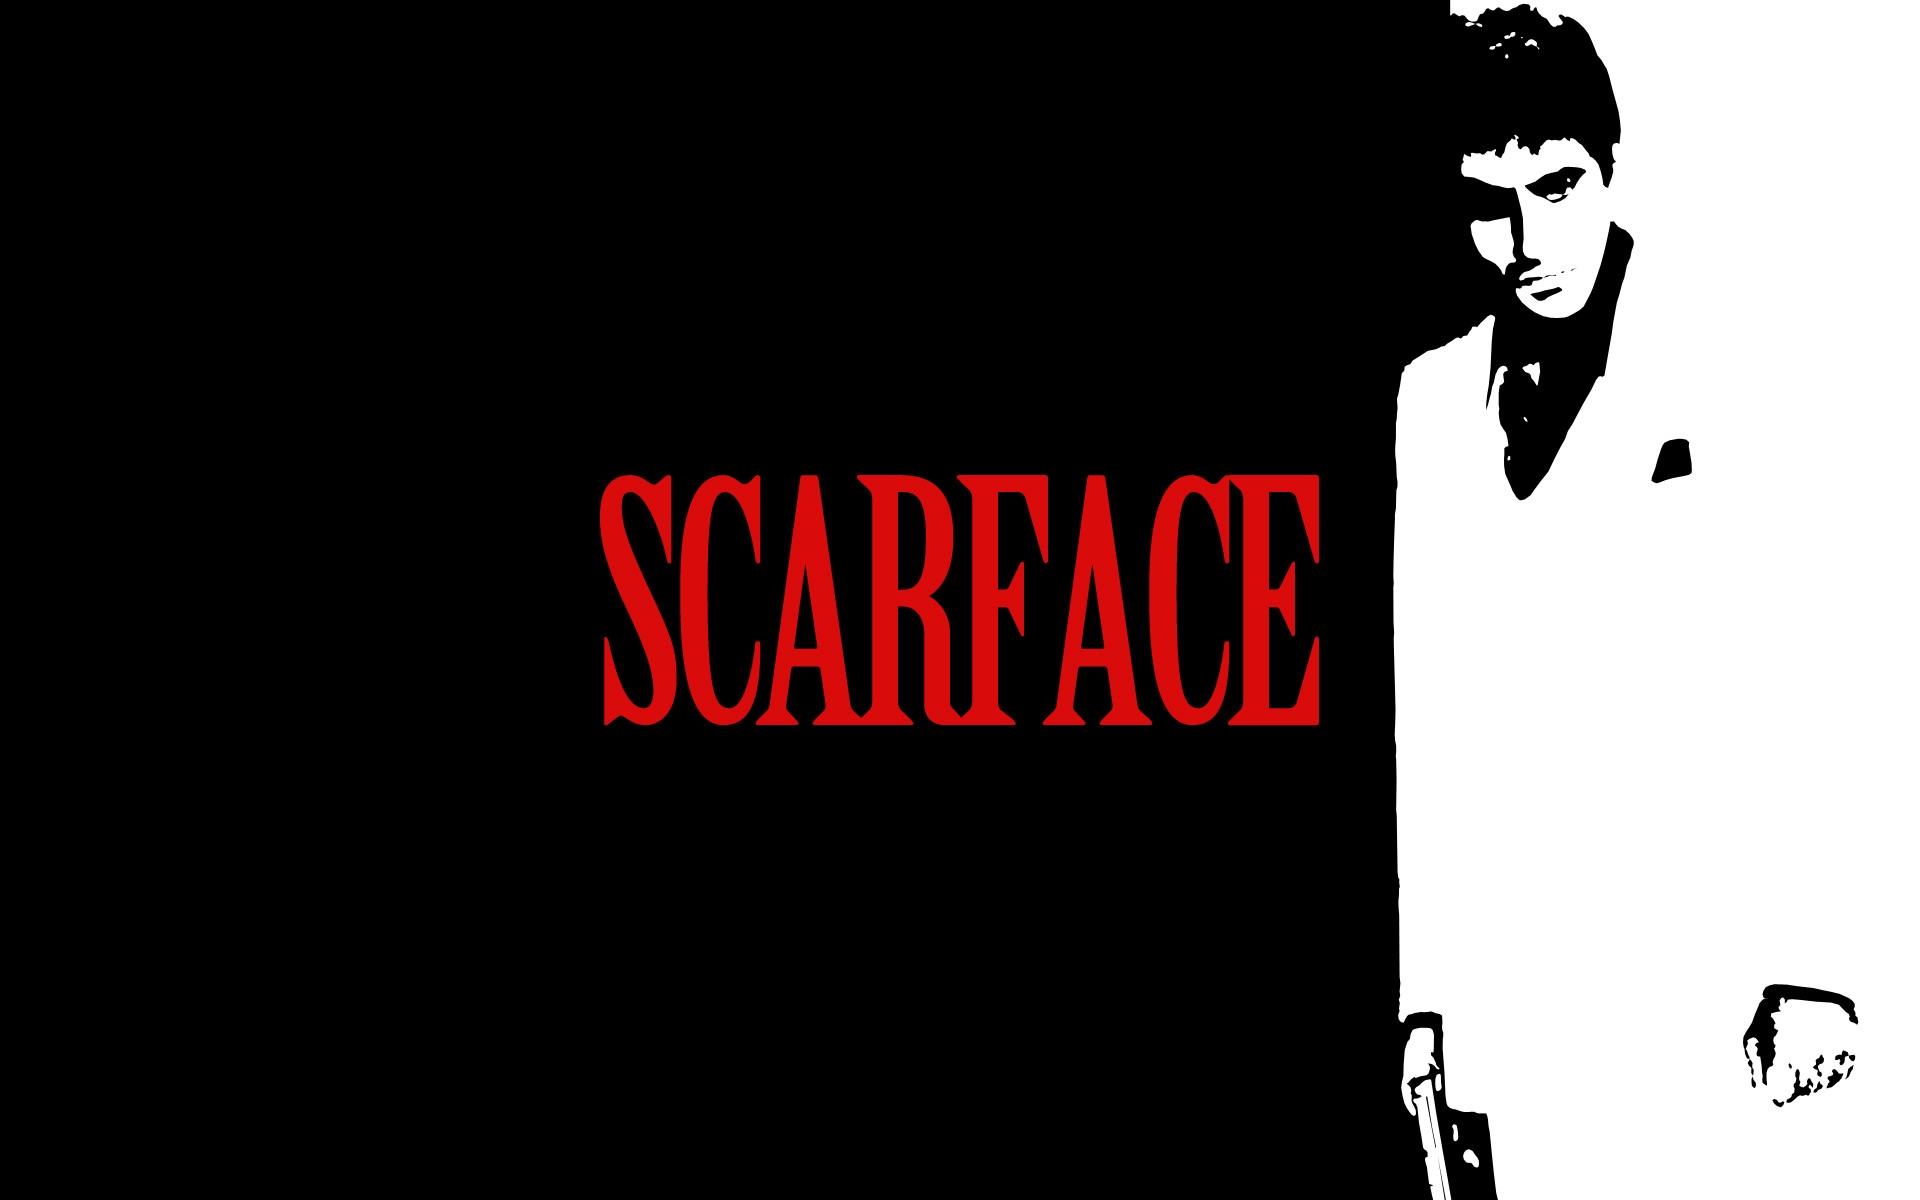 Scarface Wallpaper 70 Images HD Wallpapers Download Free Images Wallpaper [wallpaper981.blogspot.com]